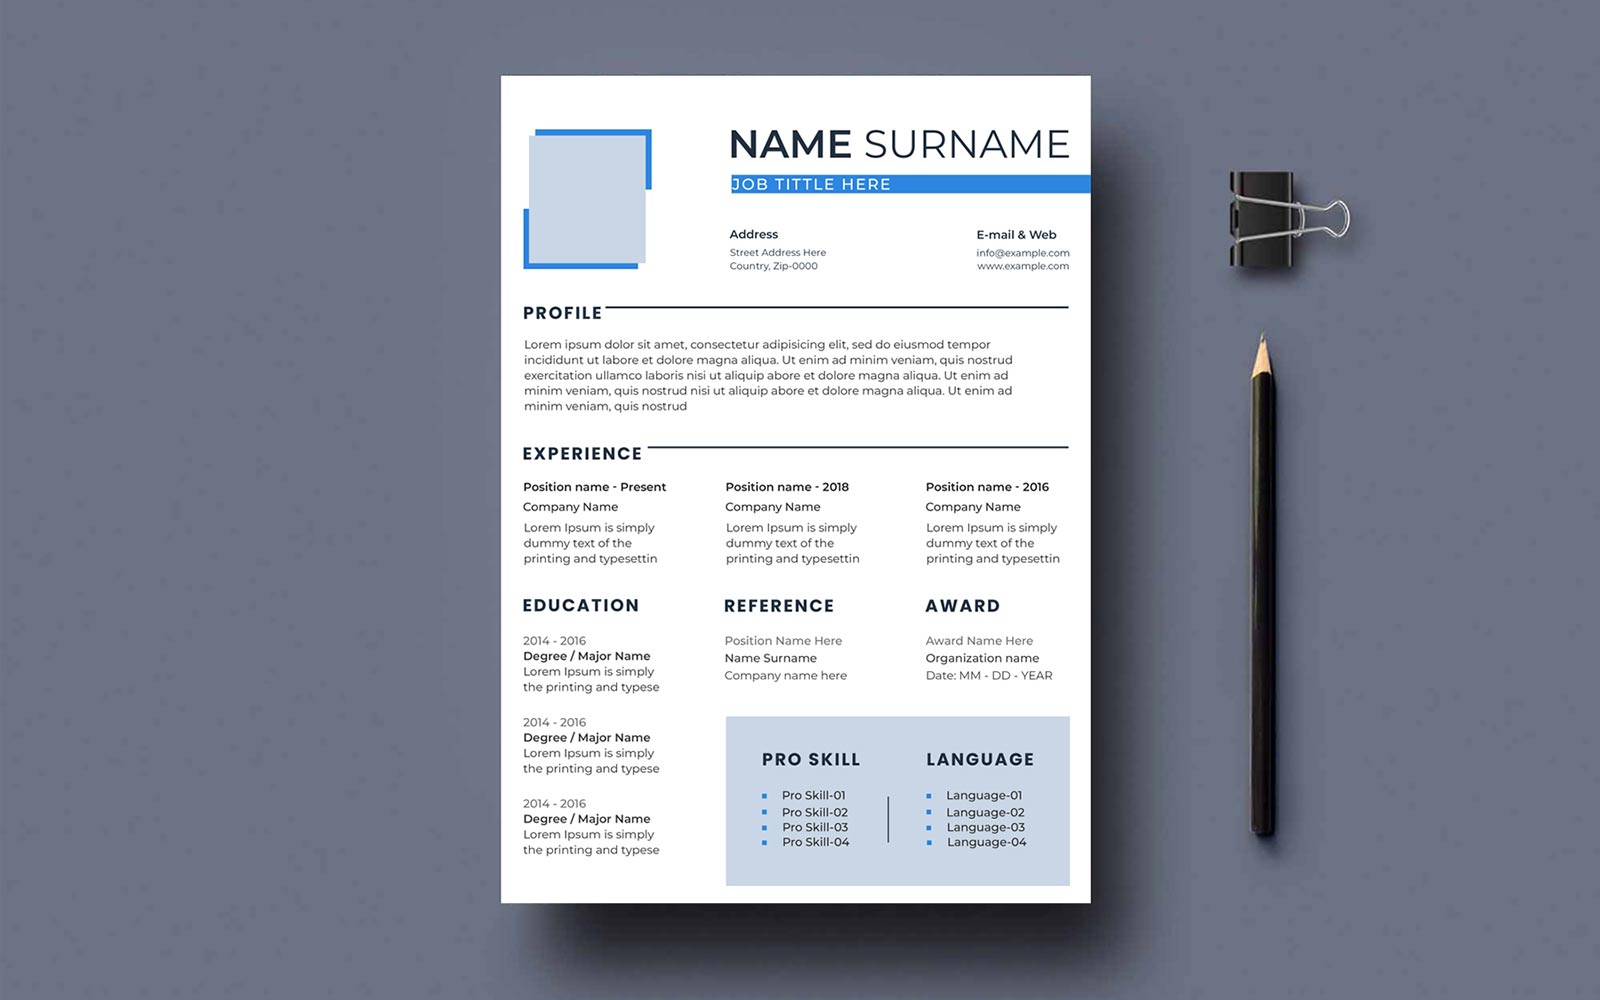 Professional resume template with blue background.